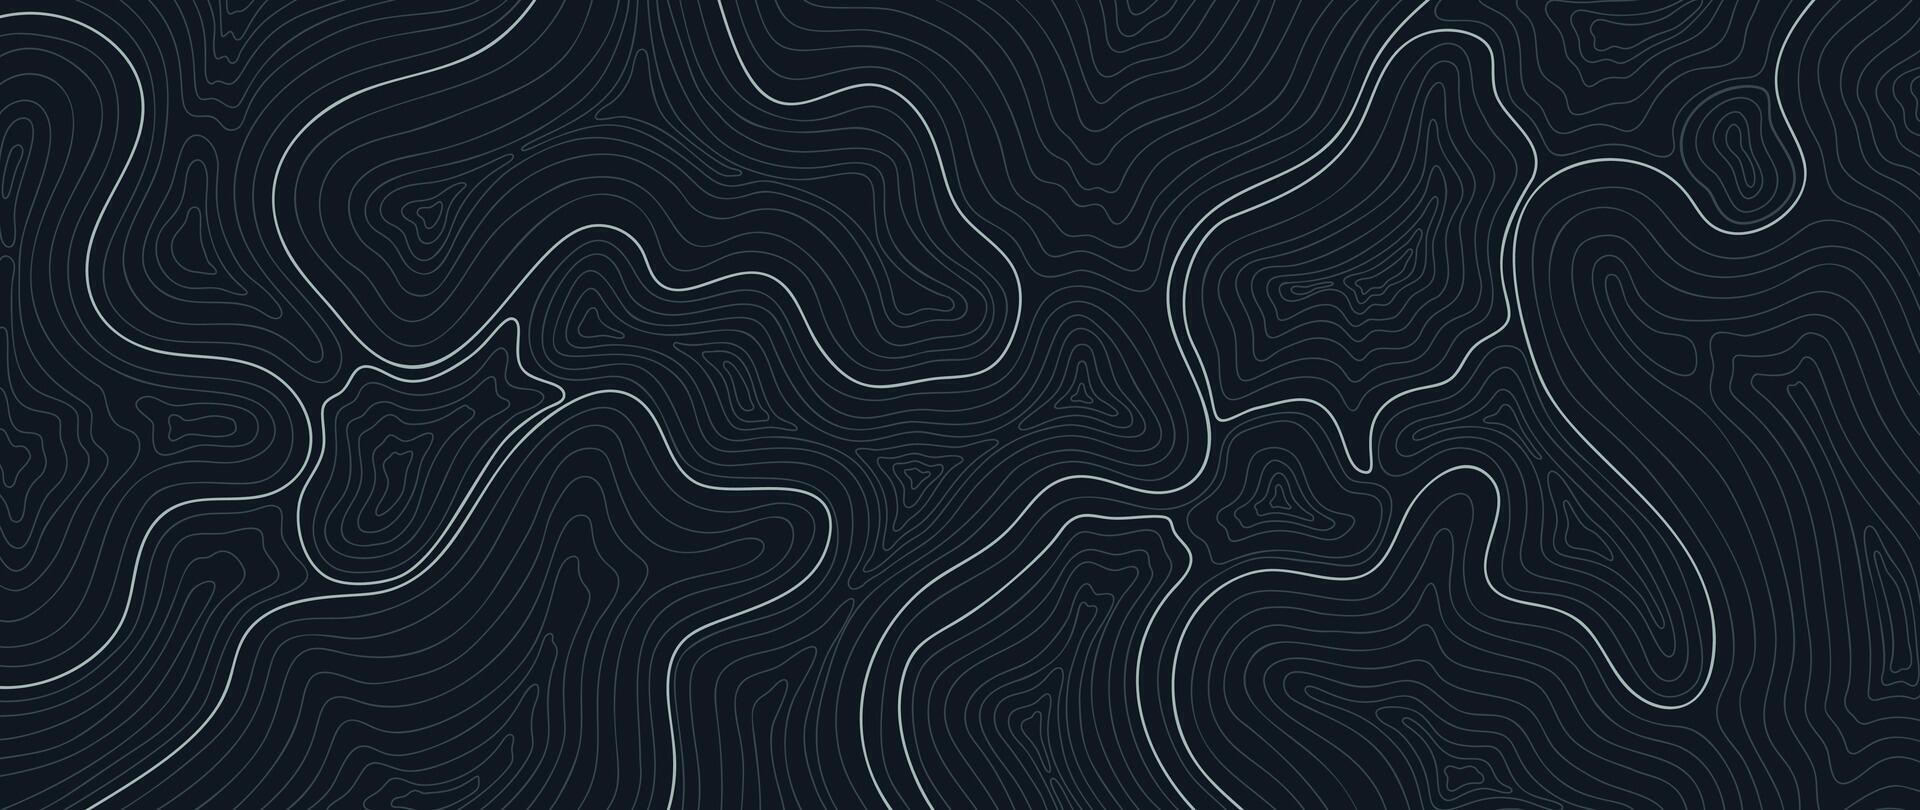 Topographic map pattern background . Abstract mountain terrain map background with abstract shape line texture. Design illustration for wall art, fabric, packaging, web, banner, wallpaper. vector